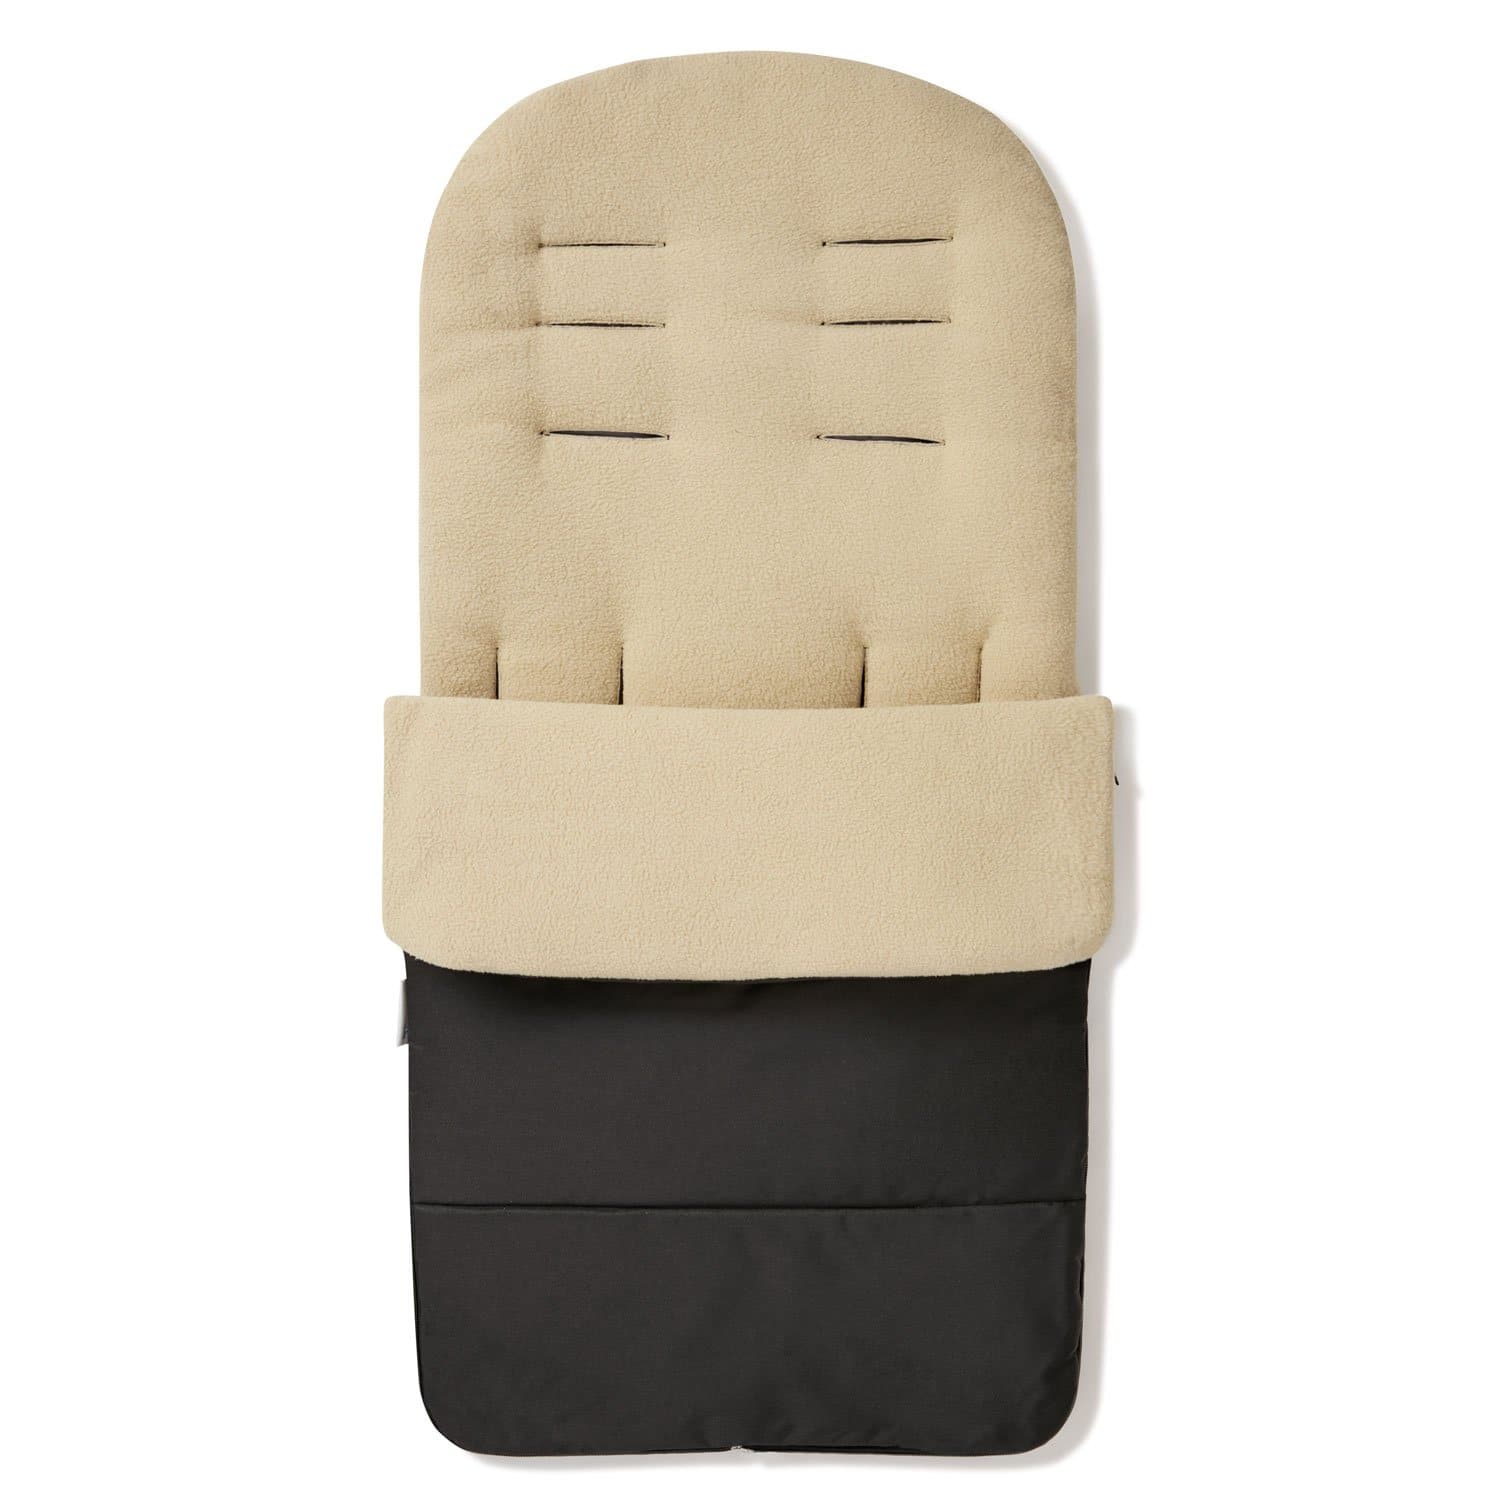 Premium Footmuff / Cosy Toes Compatible with Babyzen - Desert Sand / Fits All Models | For Your Little One